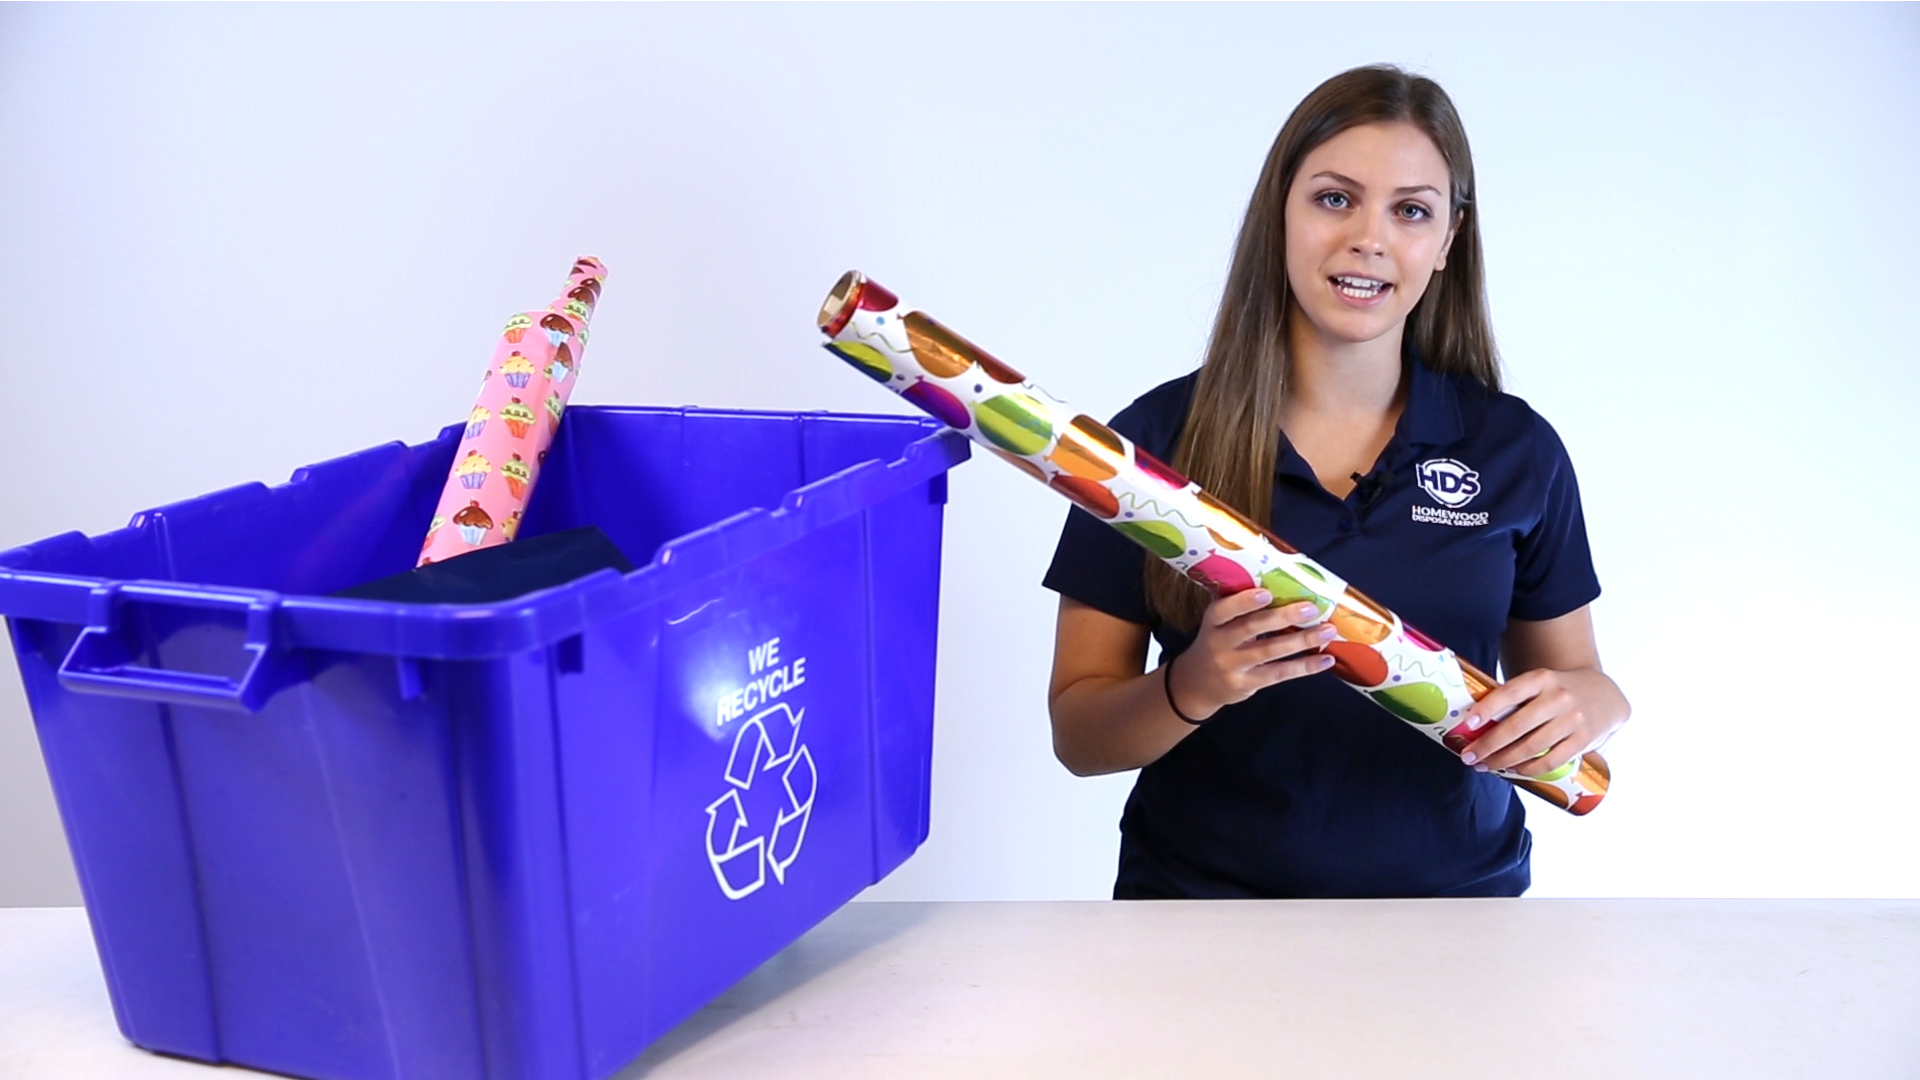 Is Wrapping Paper Recyclable? - How to Recycle Wrapping Paper